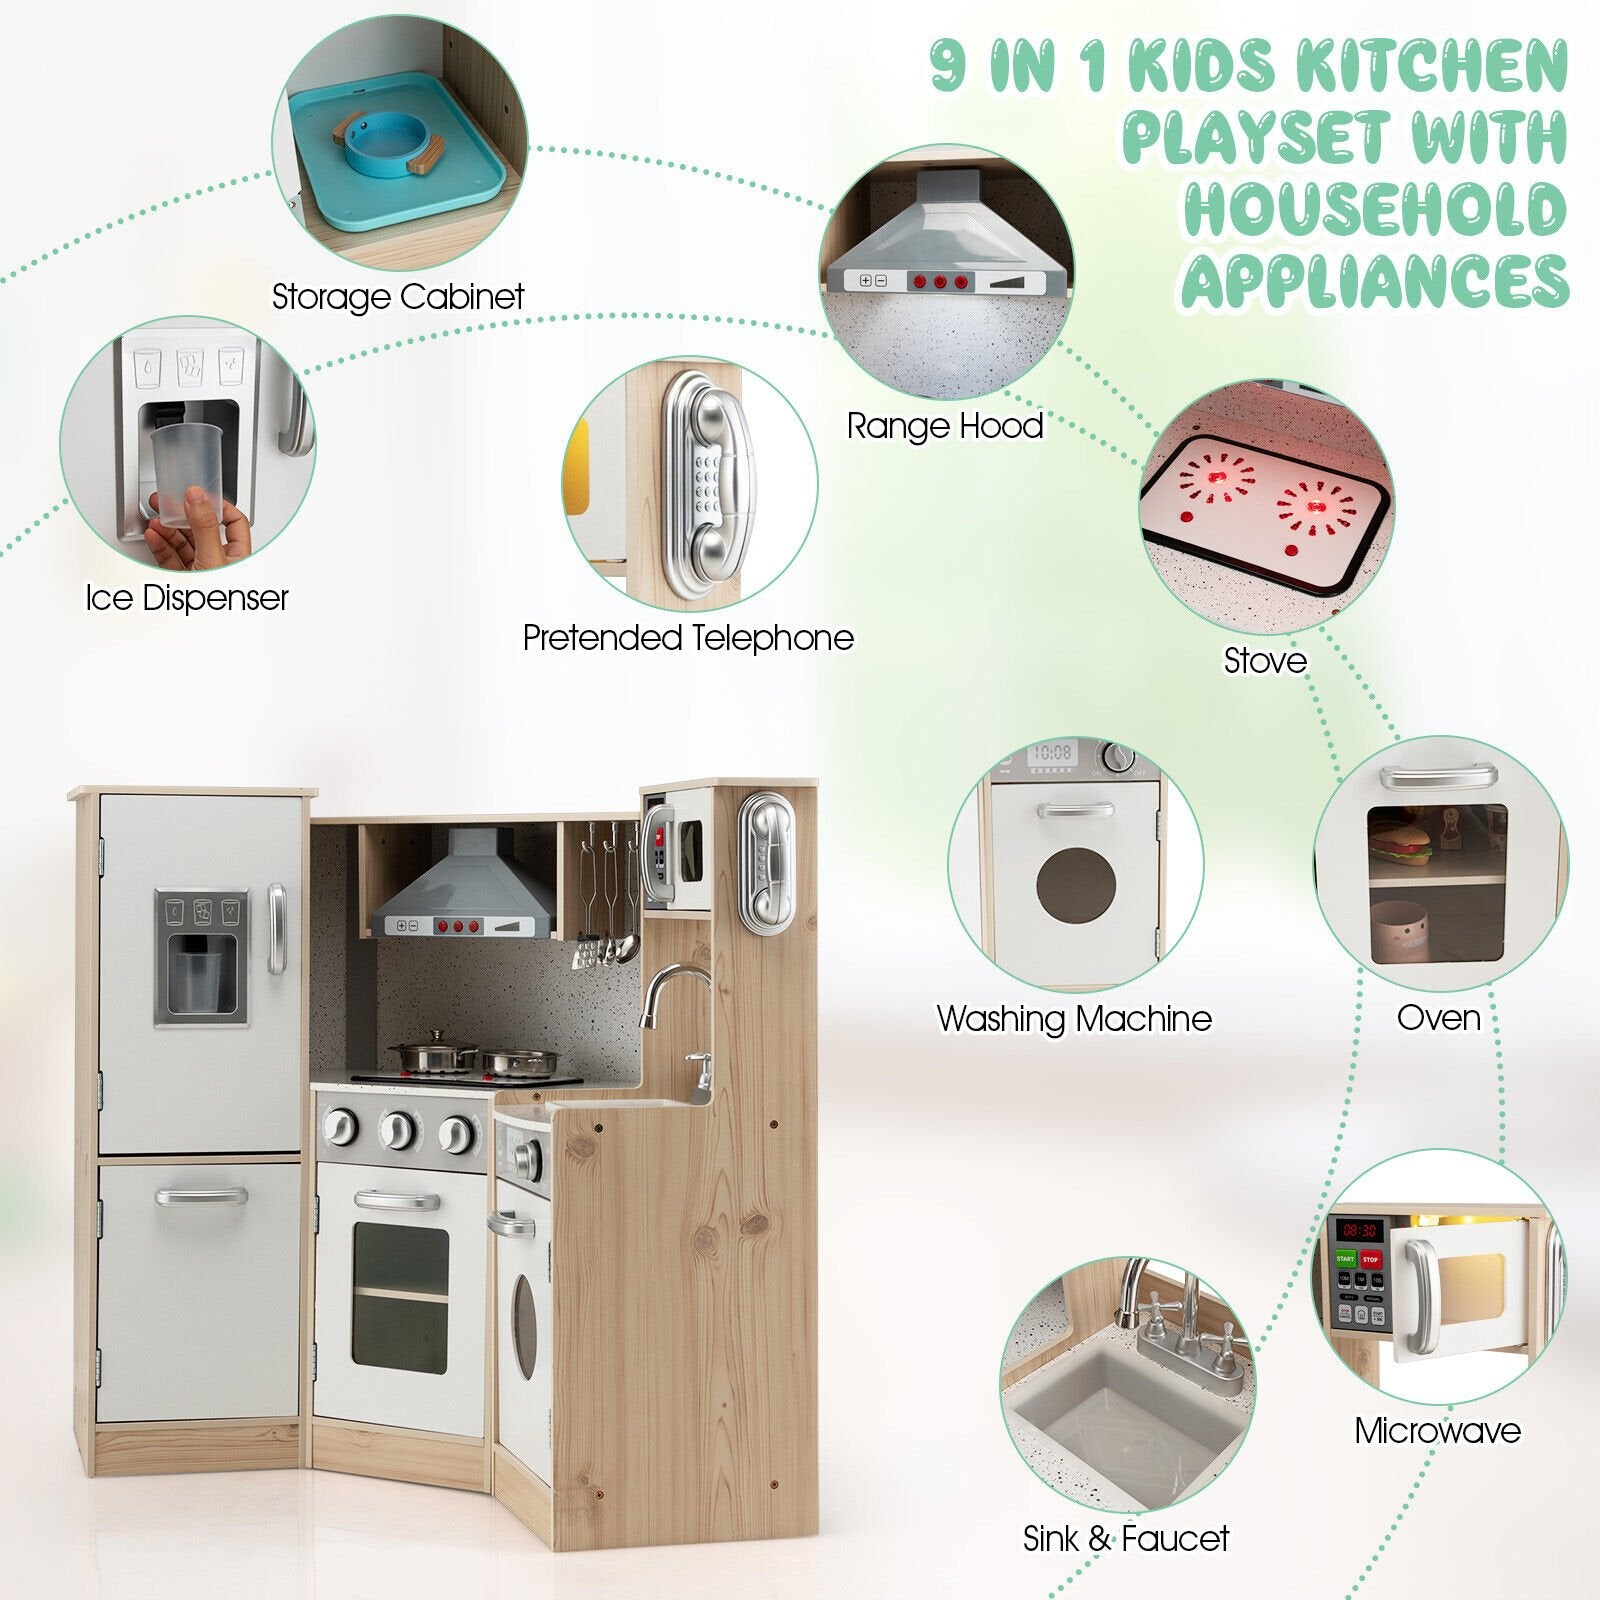 Kids Corner Wooden Kitchen Playset with Cookware Accessories, Multicolor at Gallery Canada